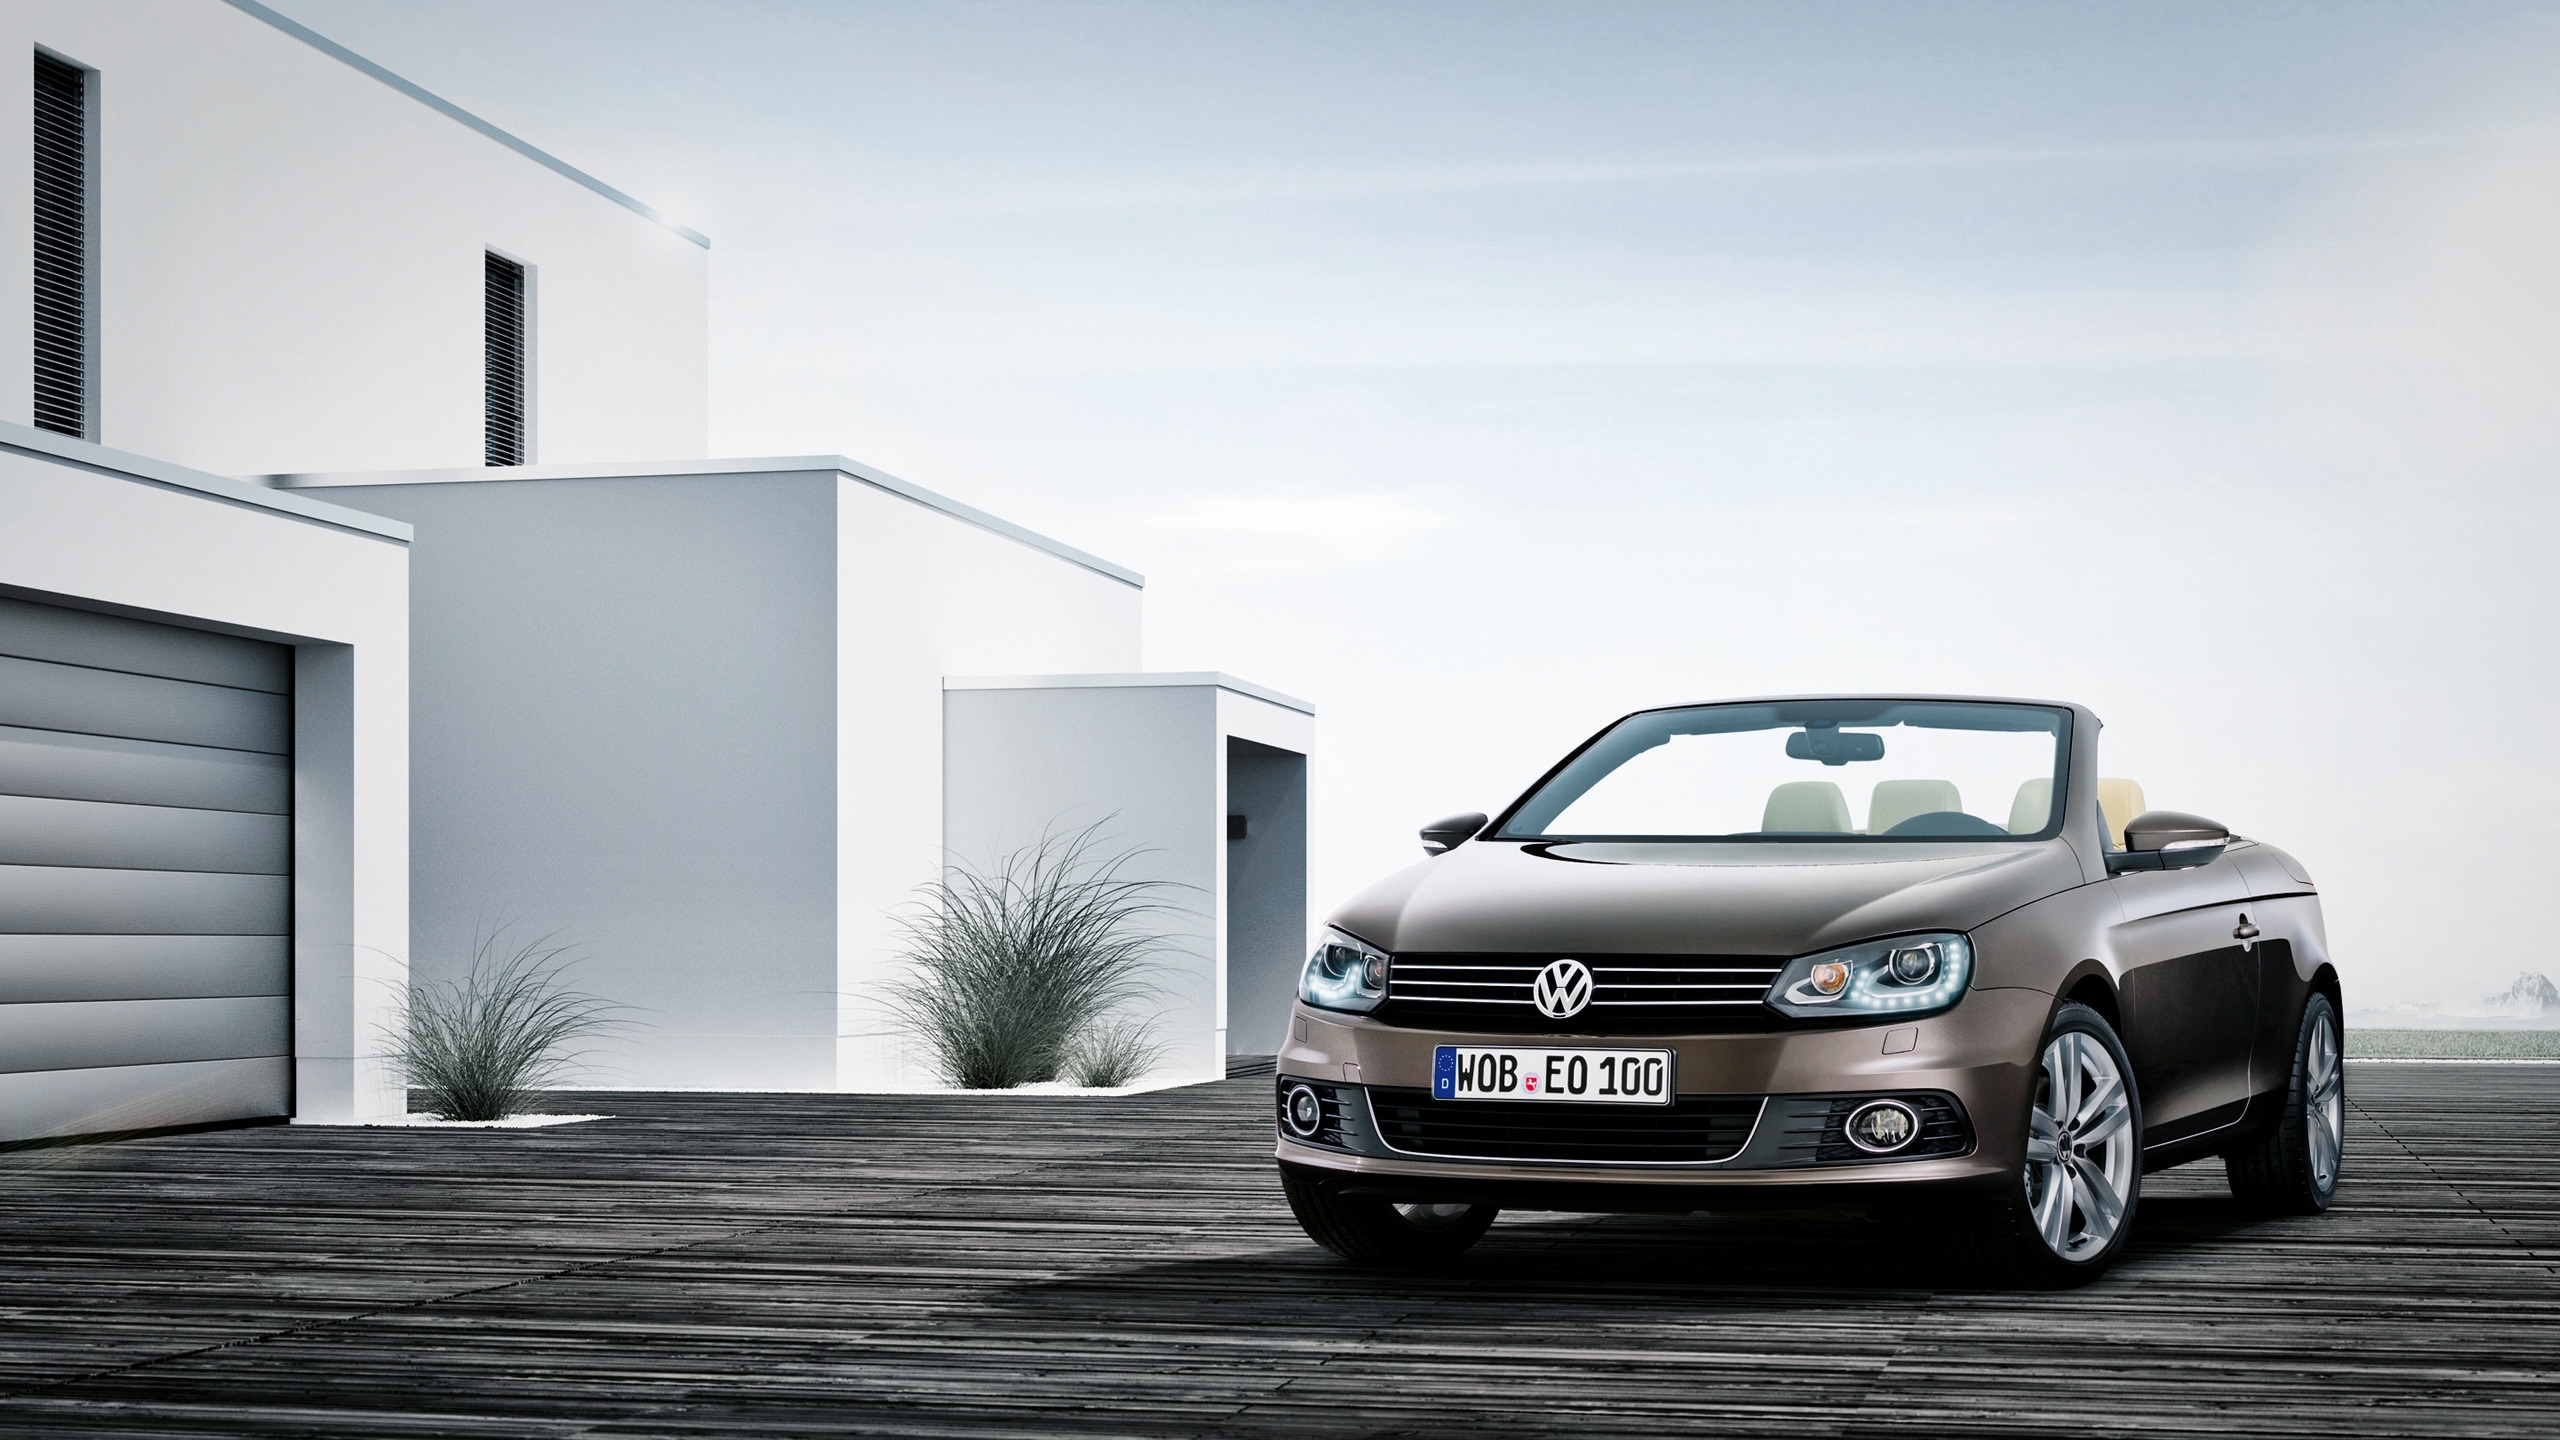 VW Eos 2011 for 2560x1440 HDTV resolution